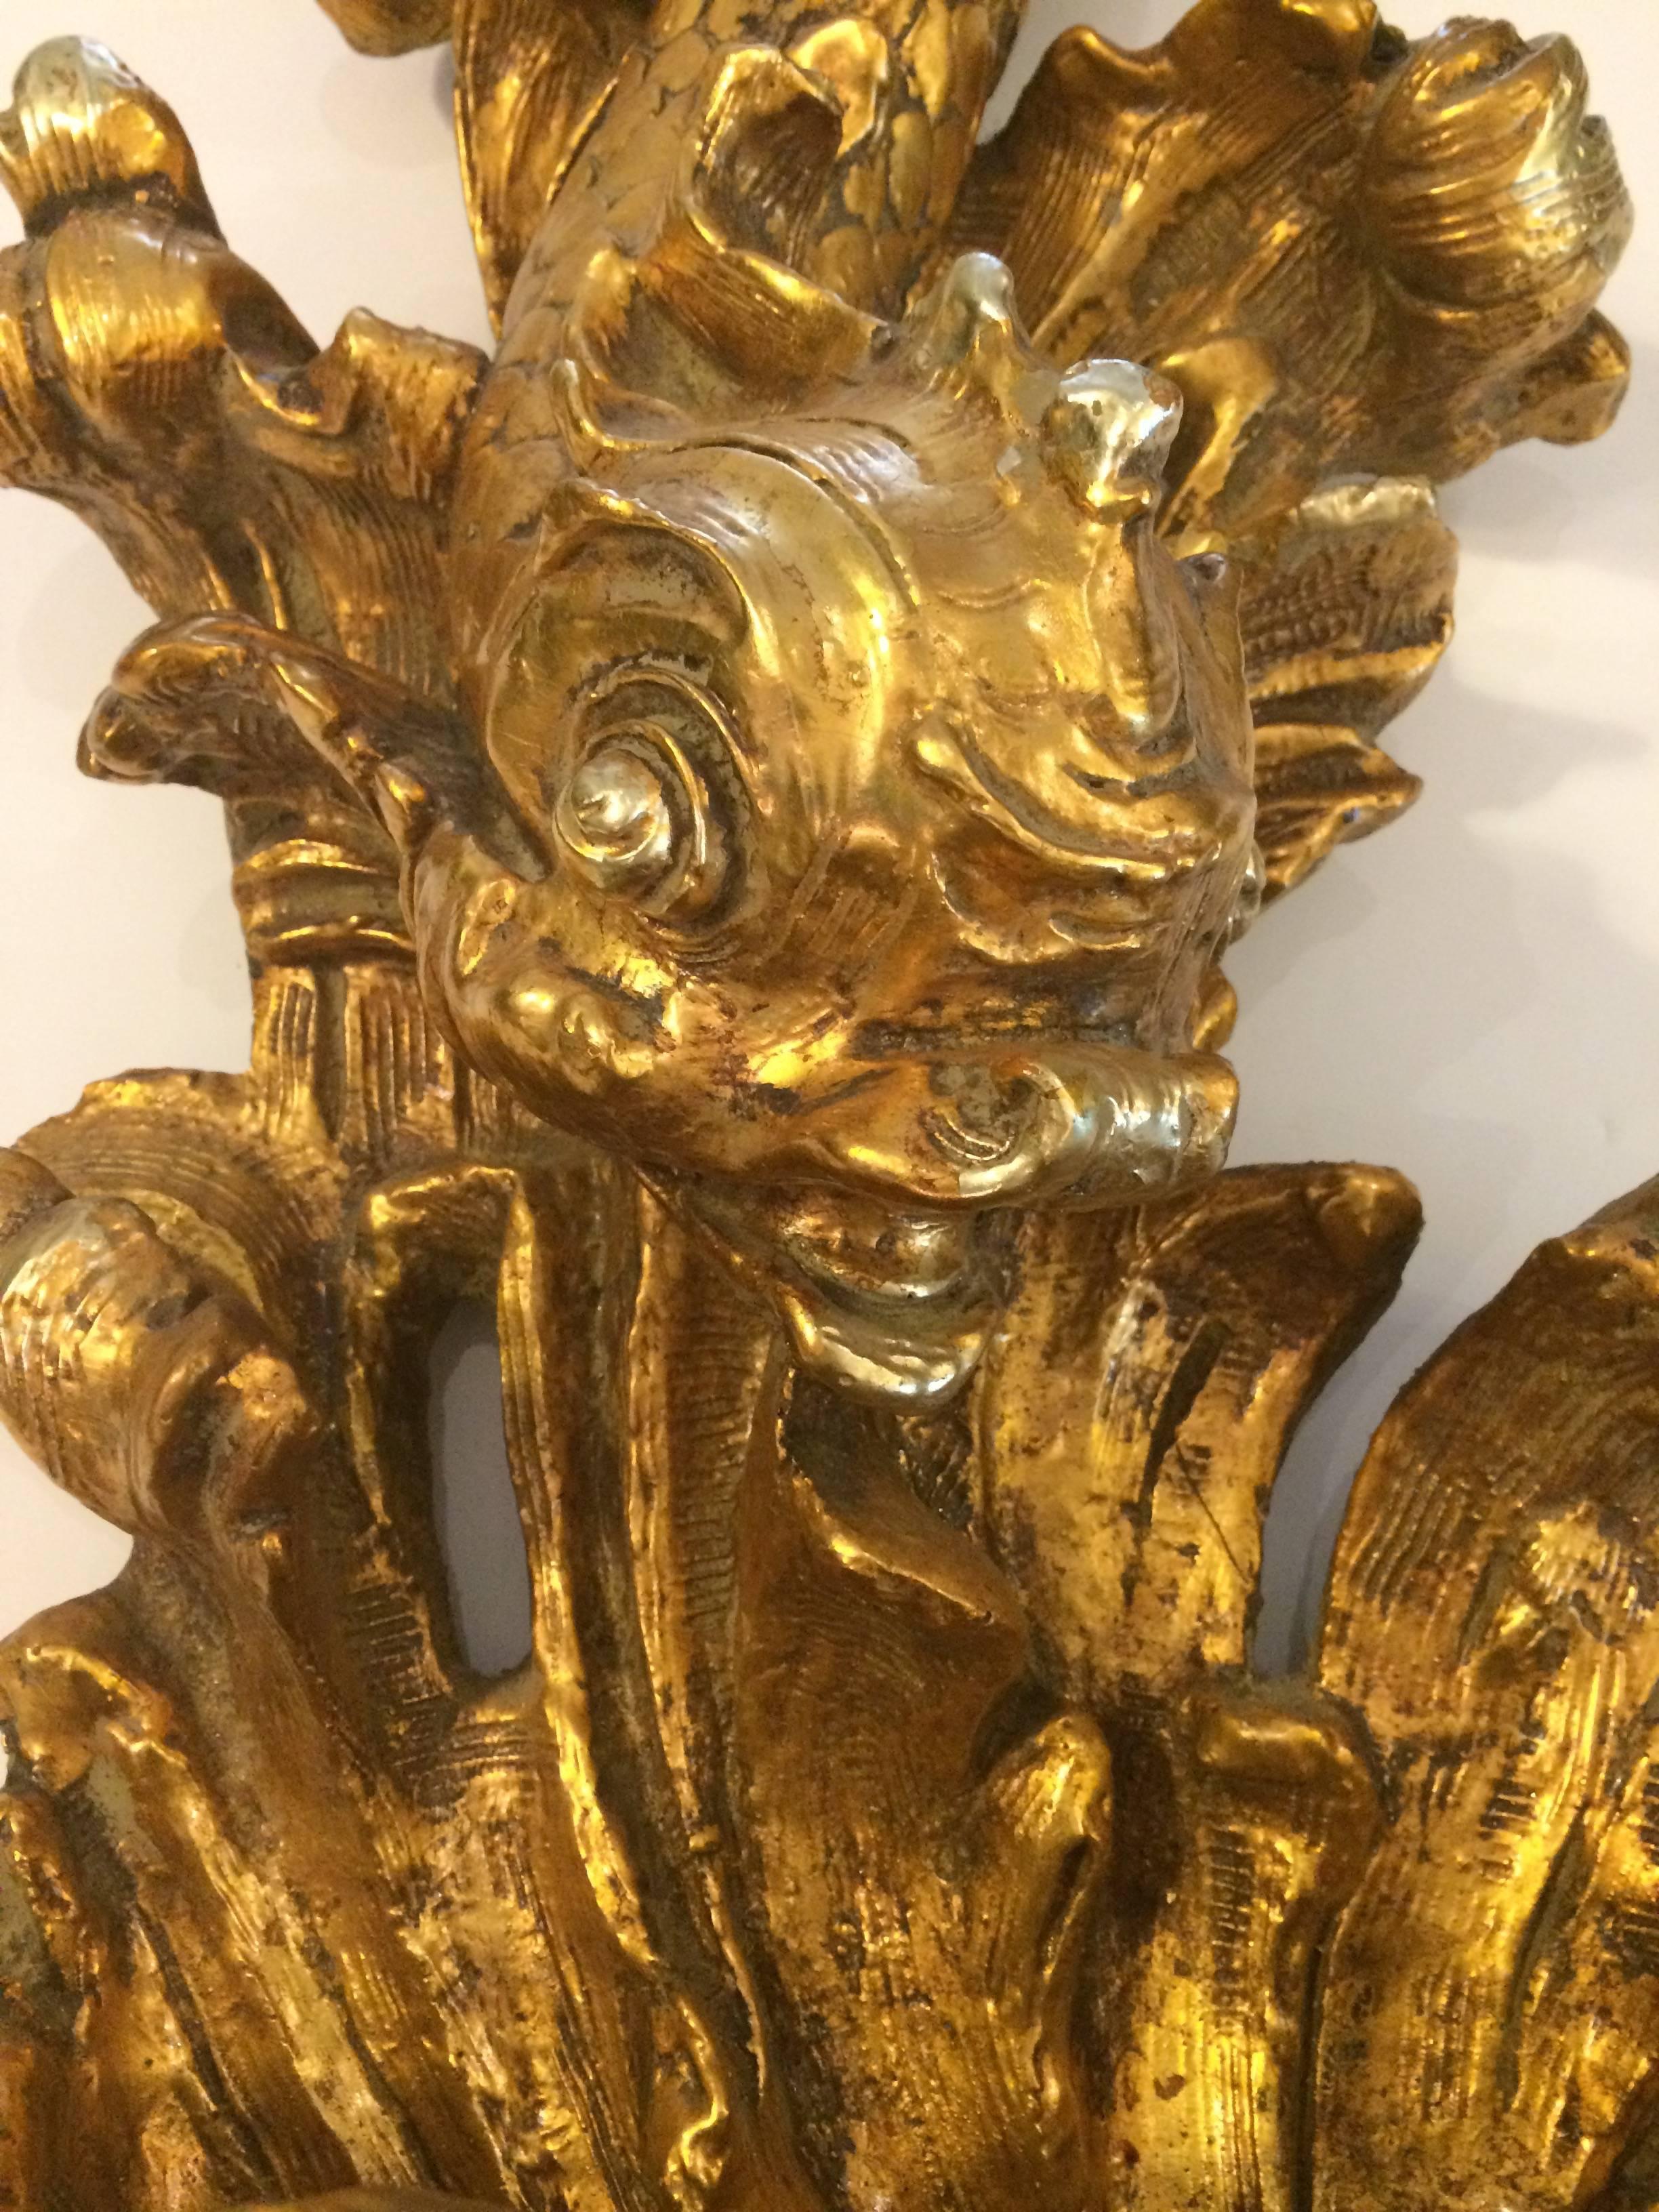 Dramatic gilded syrocco wood wall planter or sculpture having a Tony Duquette glamorous style, with central dolphin/fish among wave like curls.